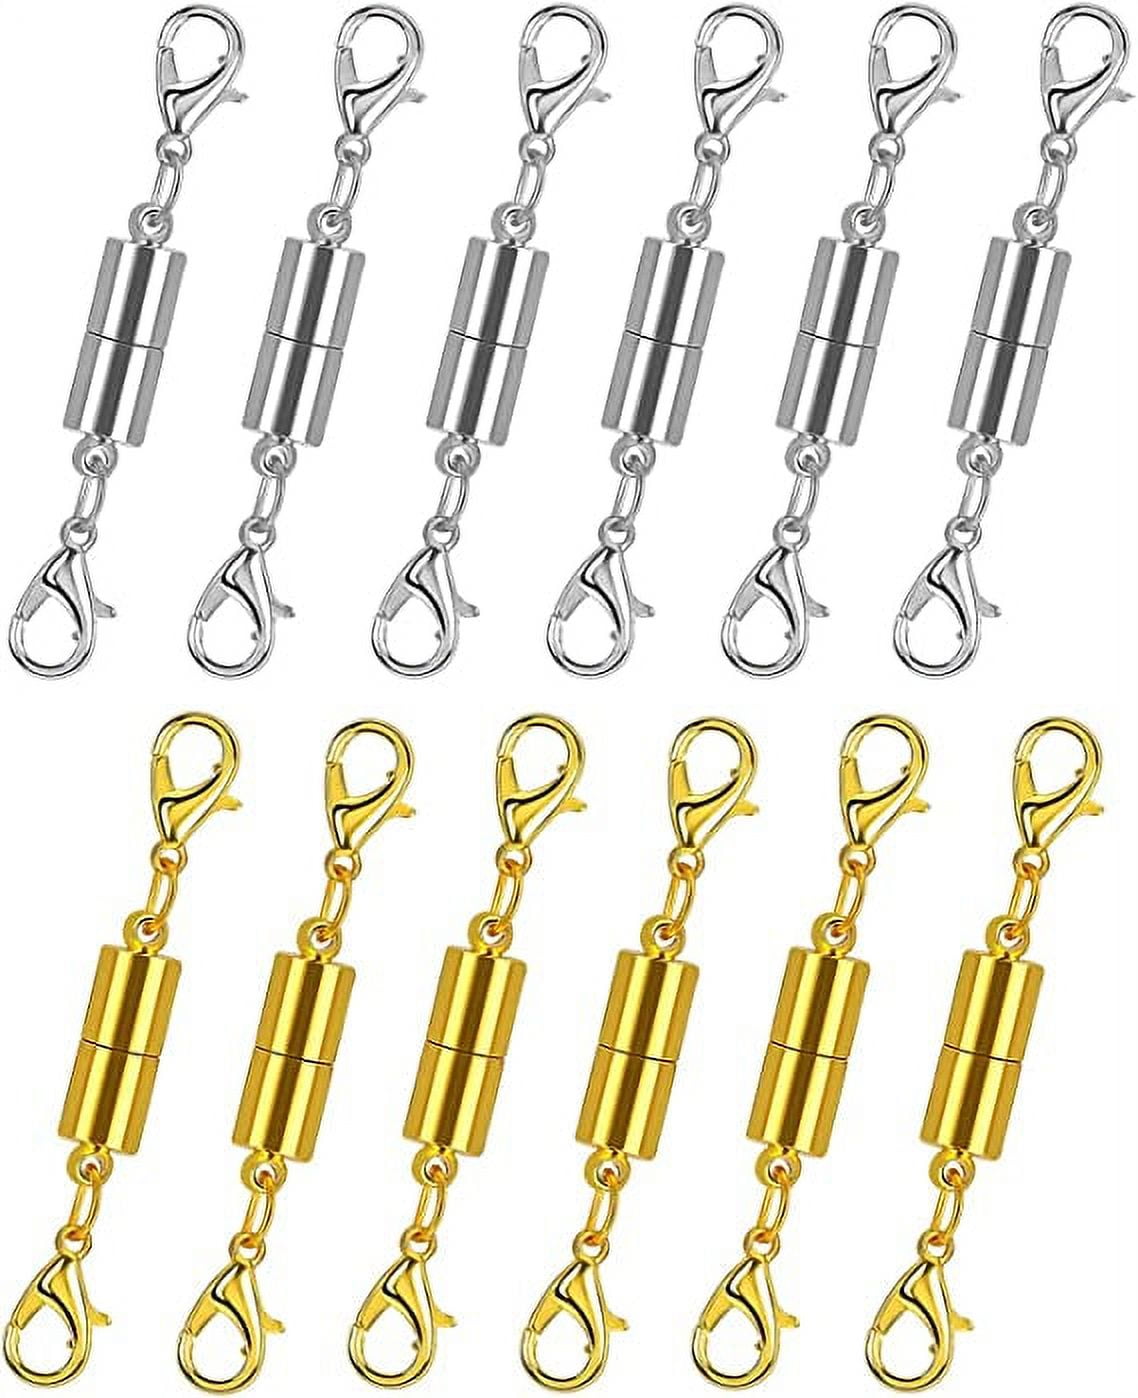 10pcs Strong Magnetic Clasps Clever Clasp Built-in Safety Magnetic Lock  With Lobster Clasp For Jewelry Making Diy